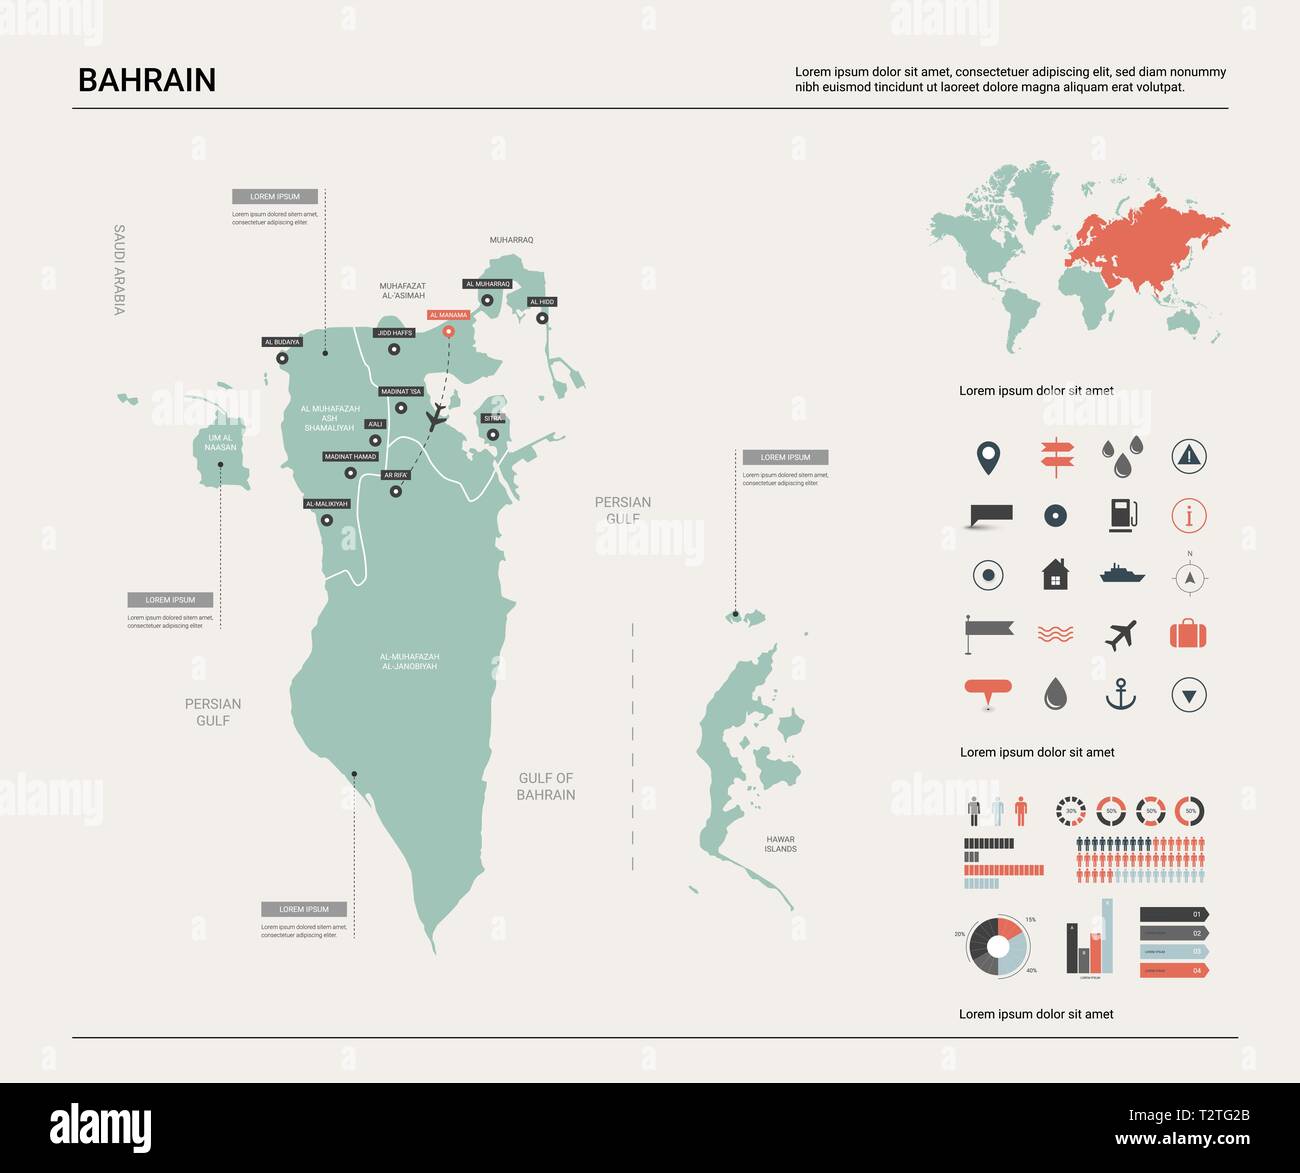 46+ Bahrain Country In World Map Pics